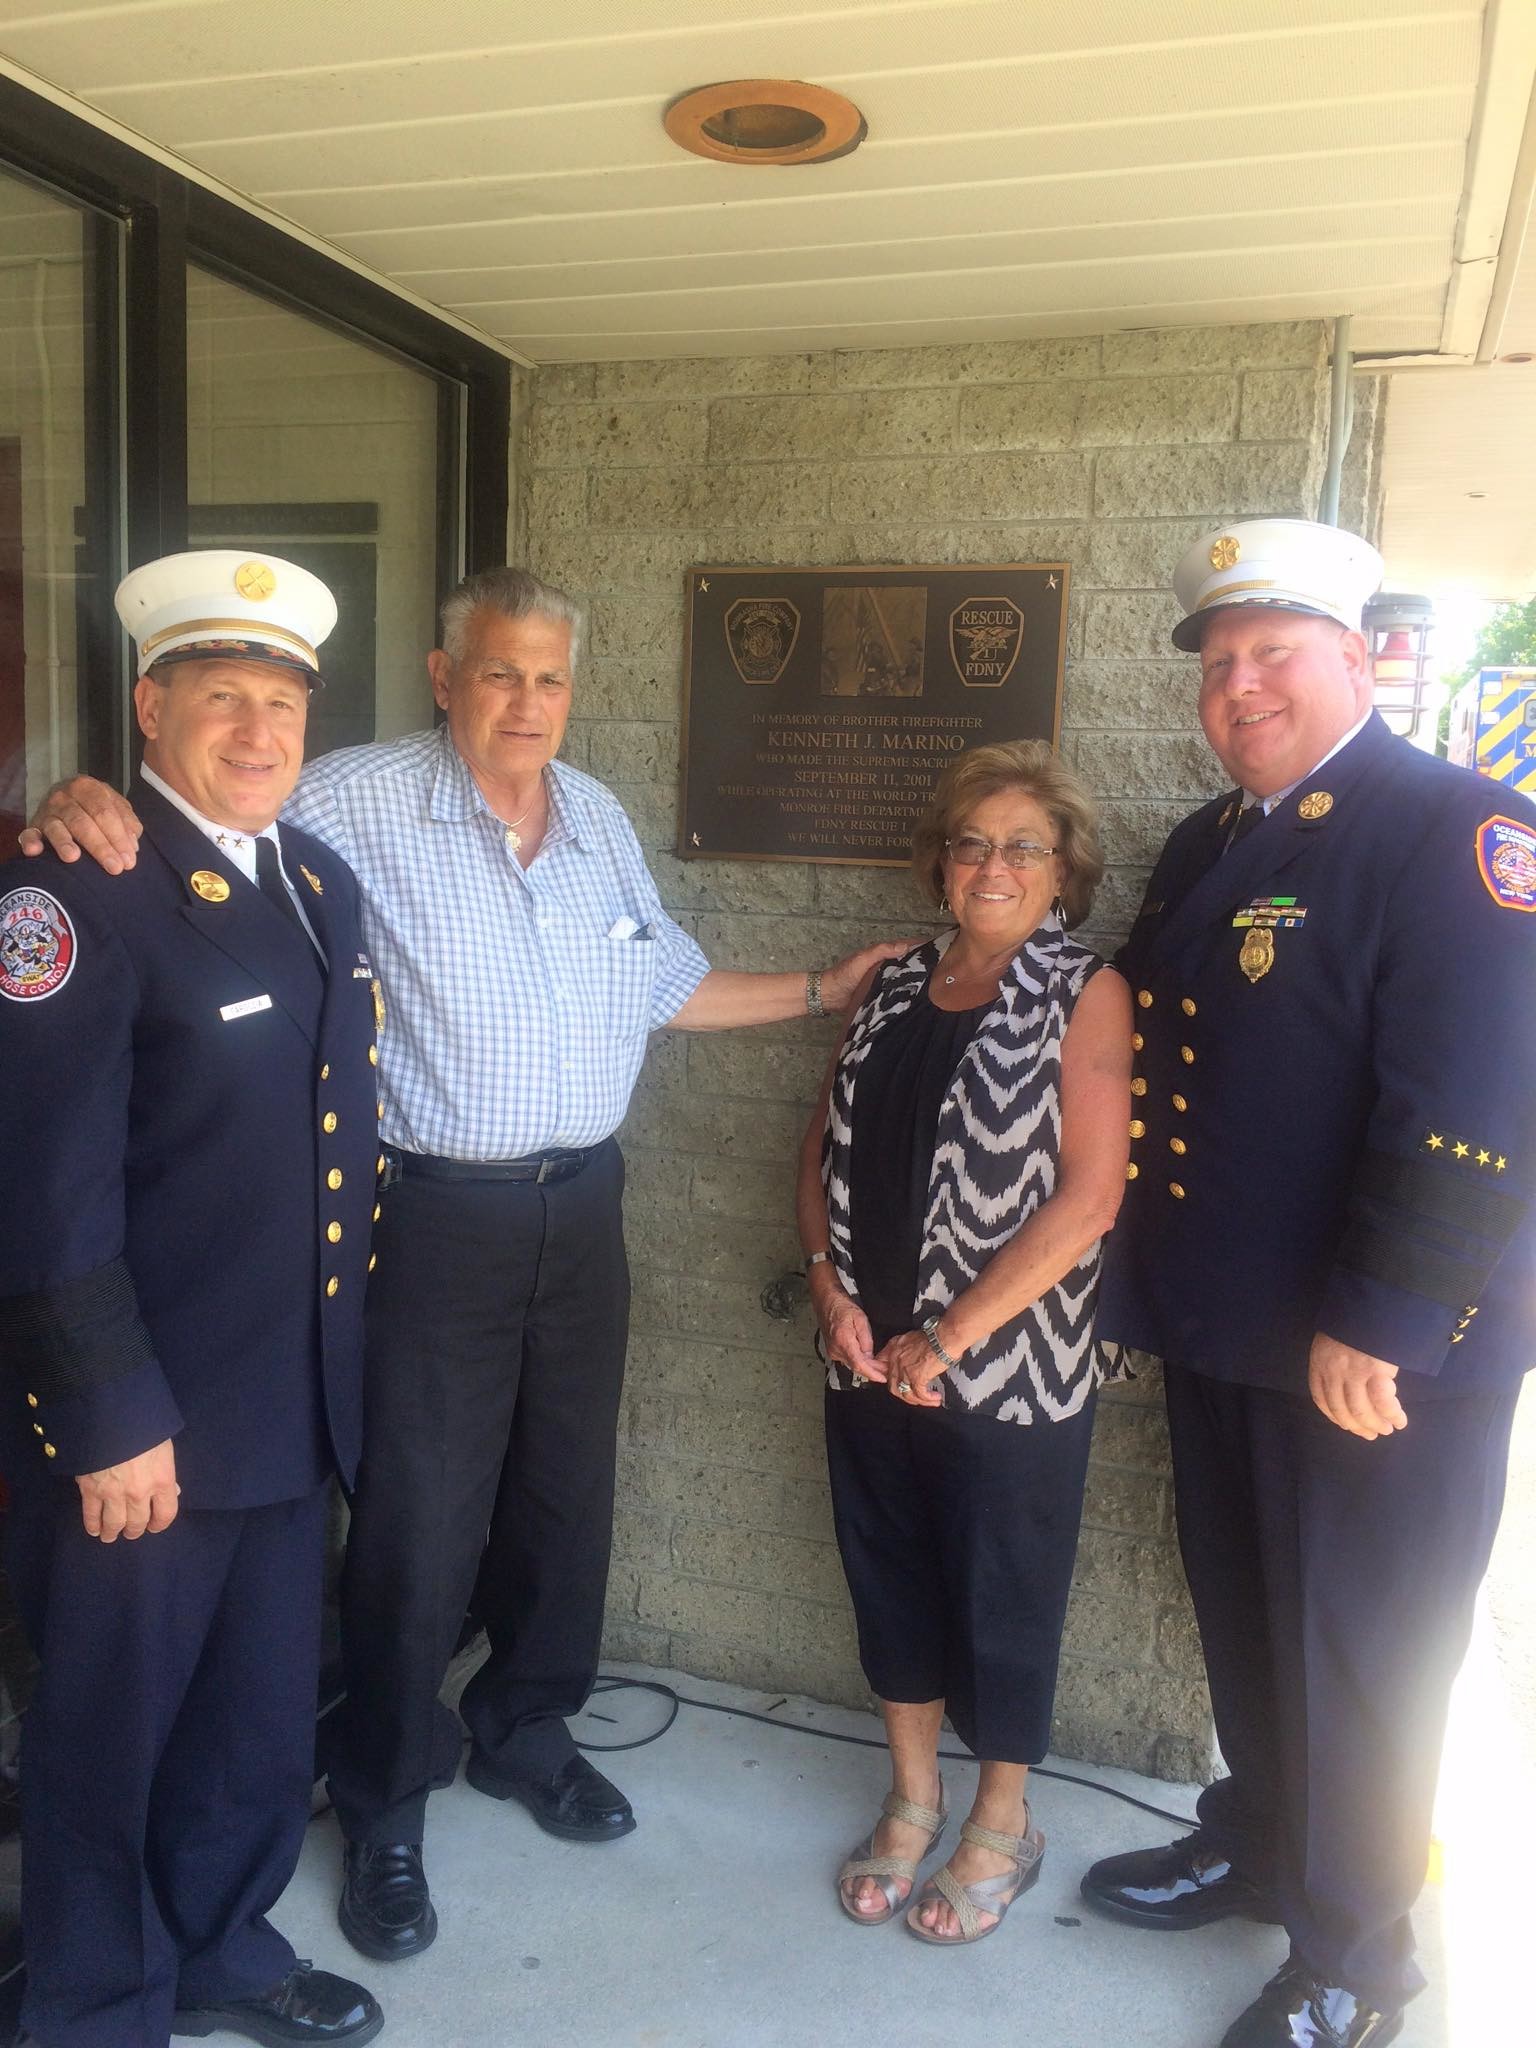 Oceanside Fire Department Chief Kevin Klein, right, and Assistant Chief Joseph Caroccia stood with the parents of fallen Sept. 11 first-responder Kenny Marino at a plaque dedication on June 10.